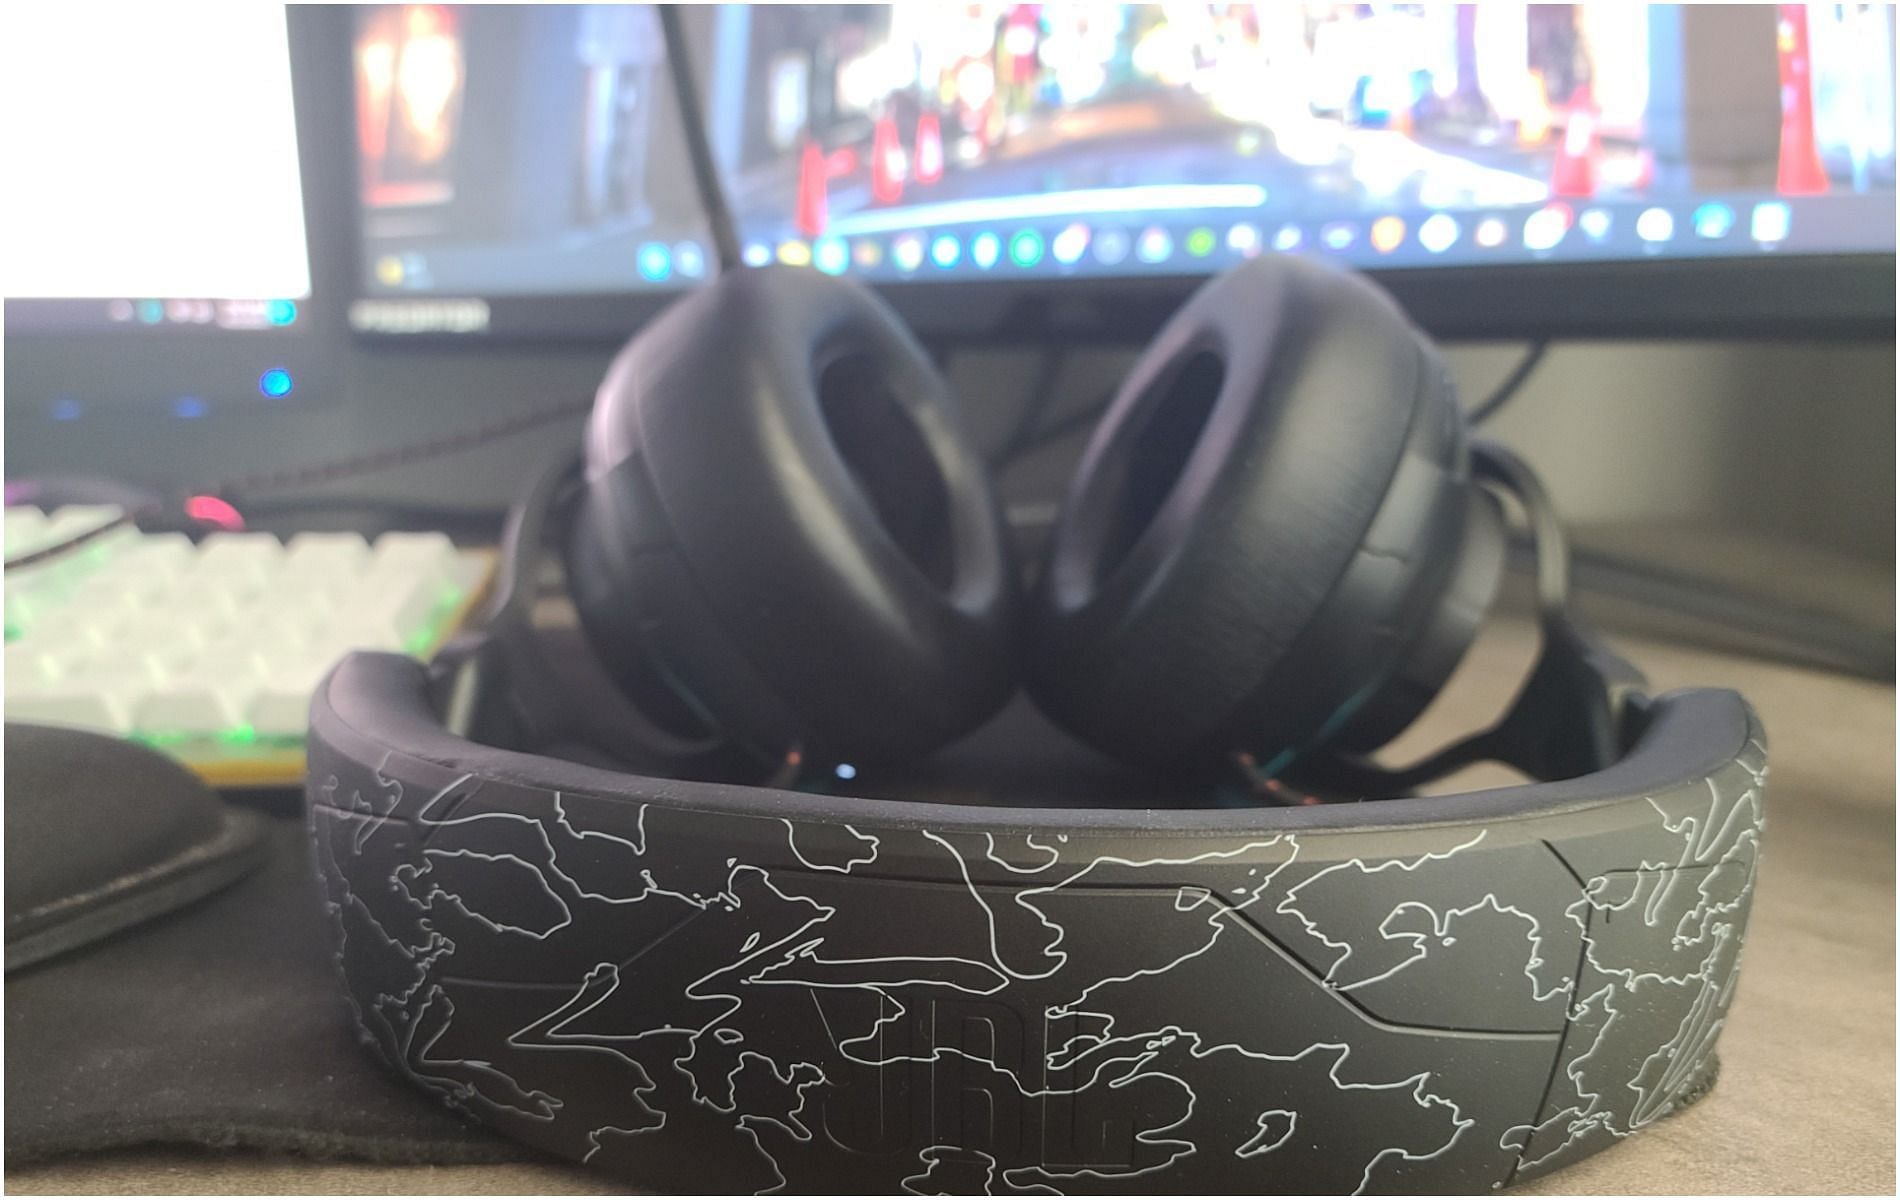 The JBL x 100 Thieves Headset is comfortable and delivers satisfying audio to gamers (Image via Sportskeeda)